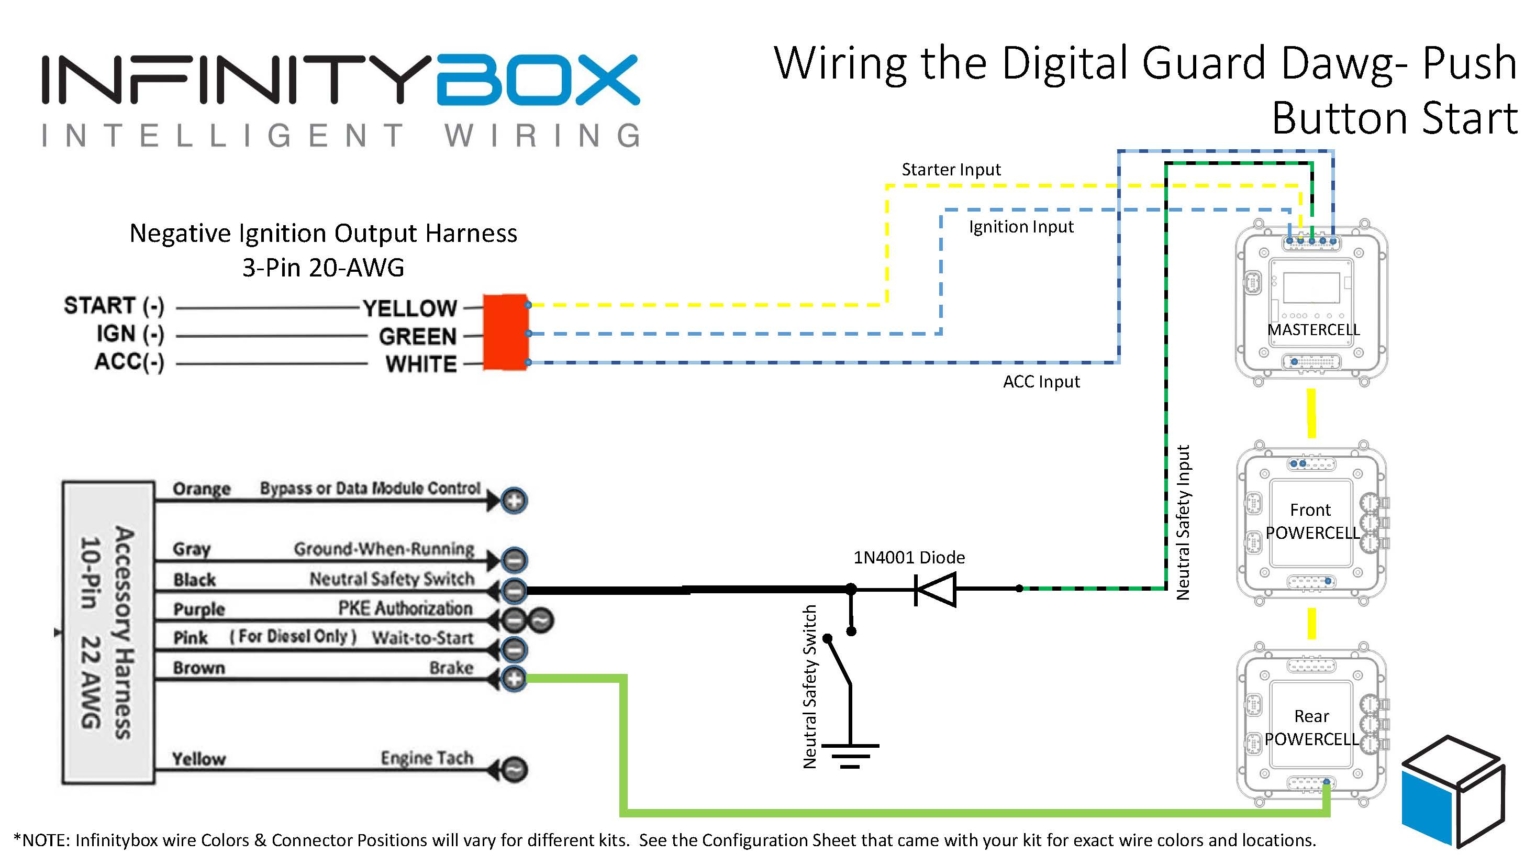 Picture of the wiring diagram showing the Digital Guard Dawg Push Button St...